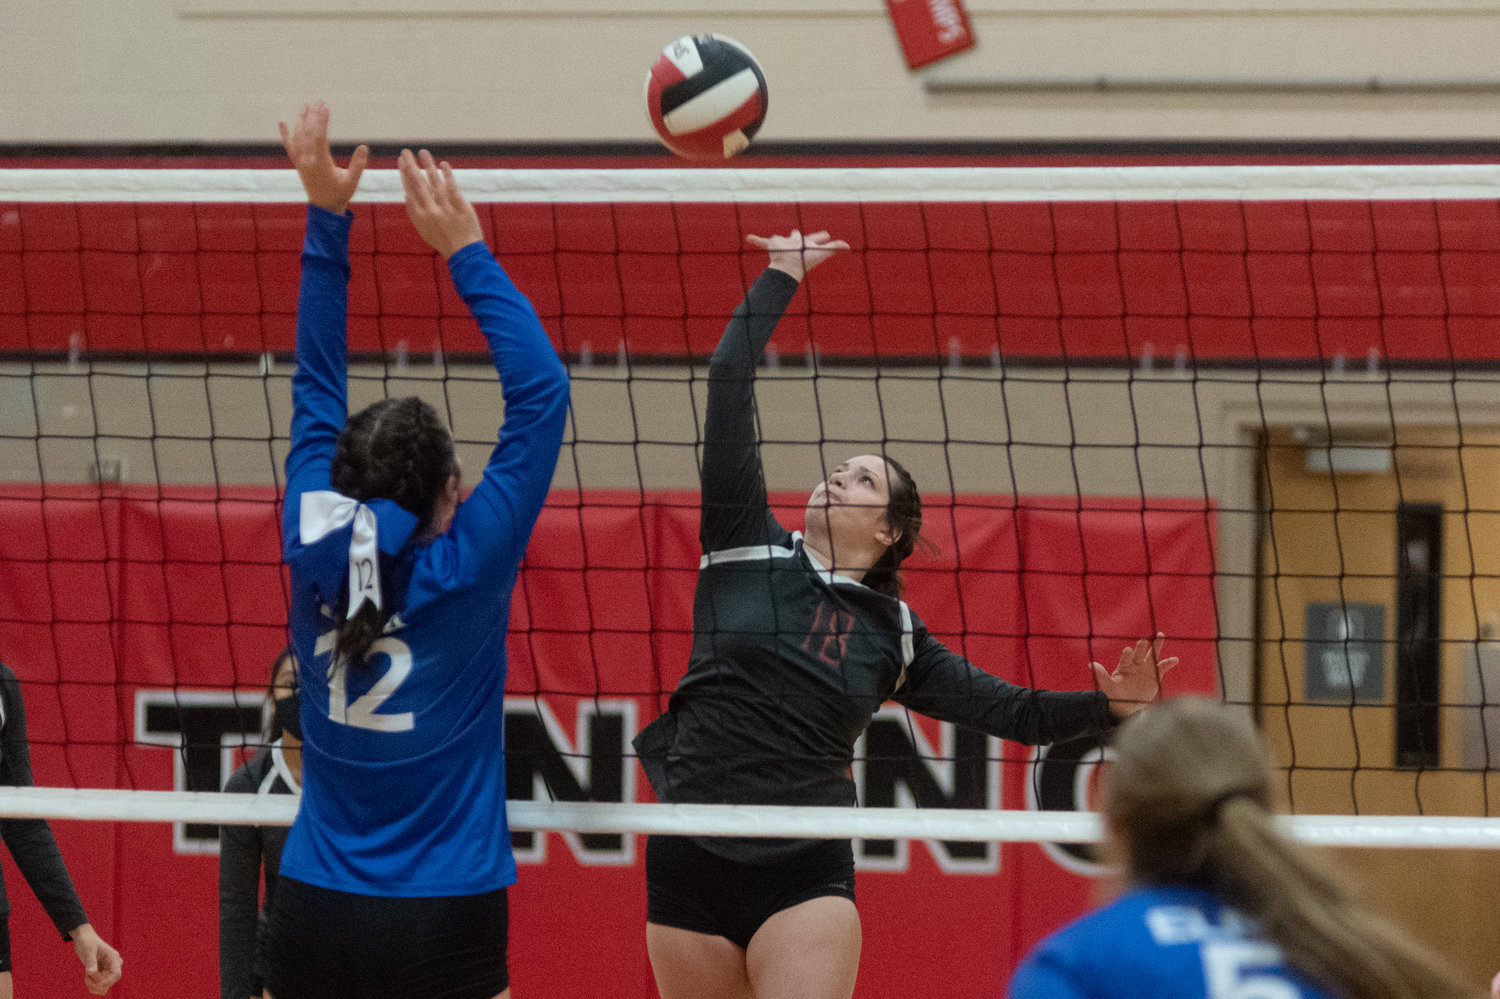 Tenino senior Brittany Maynard goes for a spike in the Beavers loss to Elma Sept. 30.